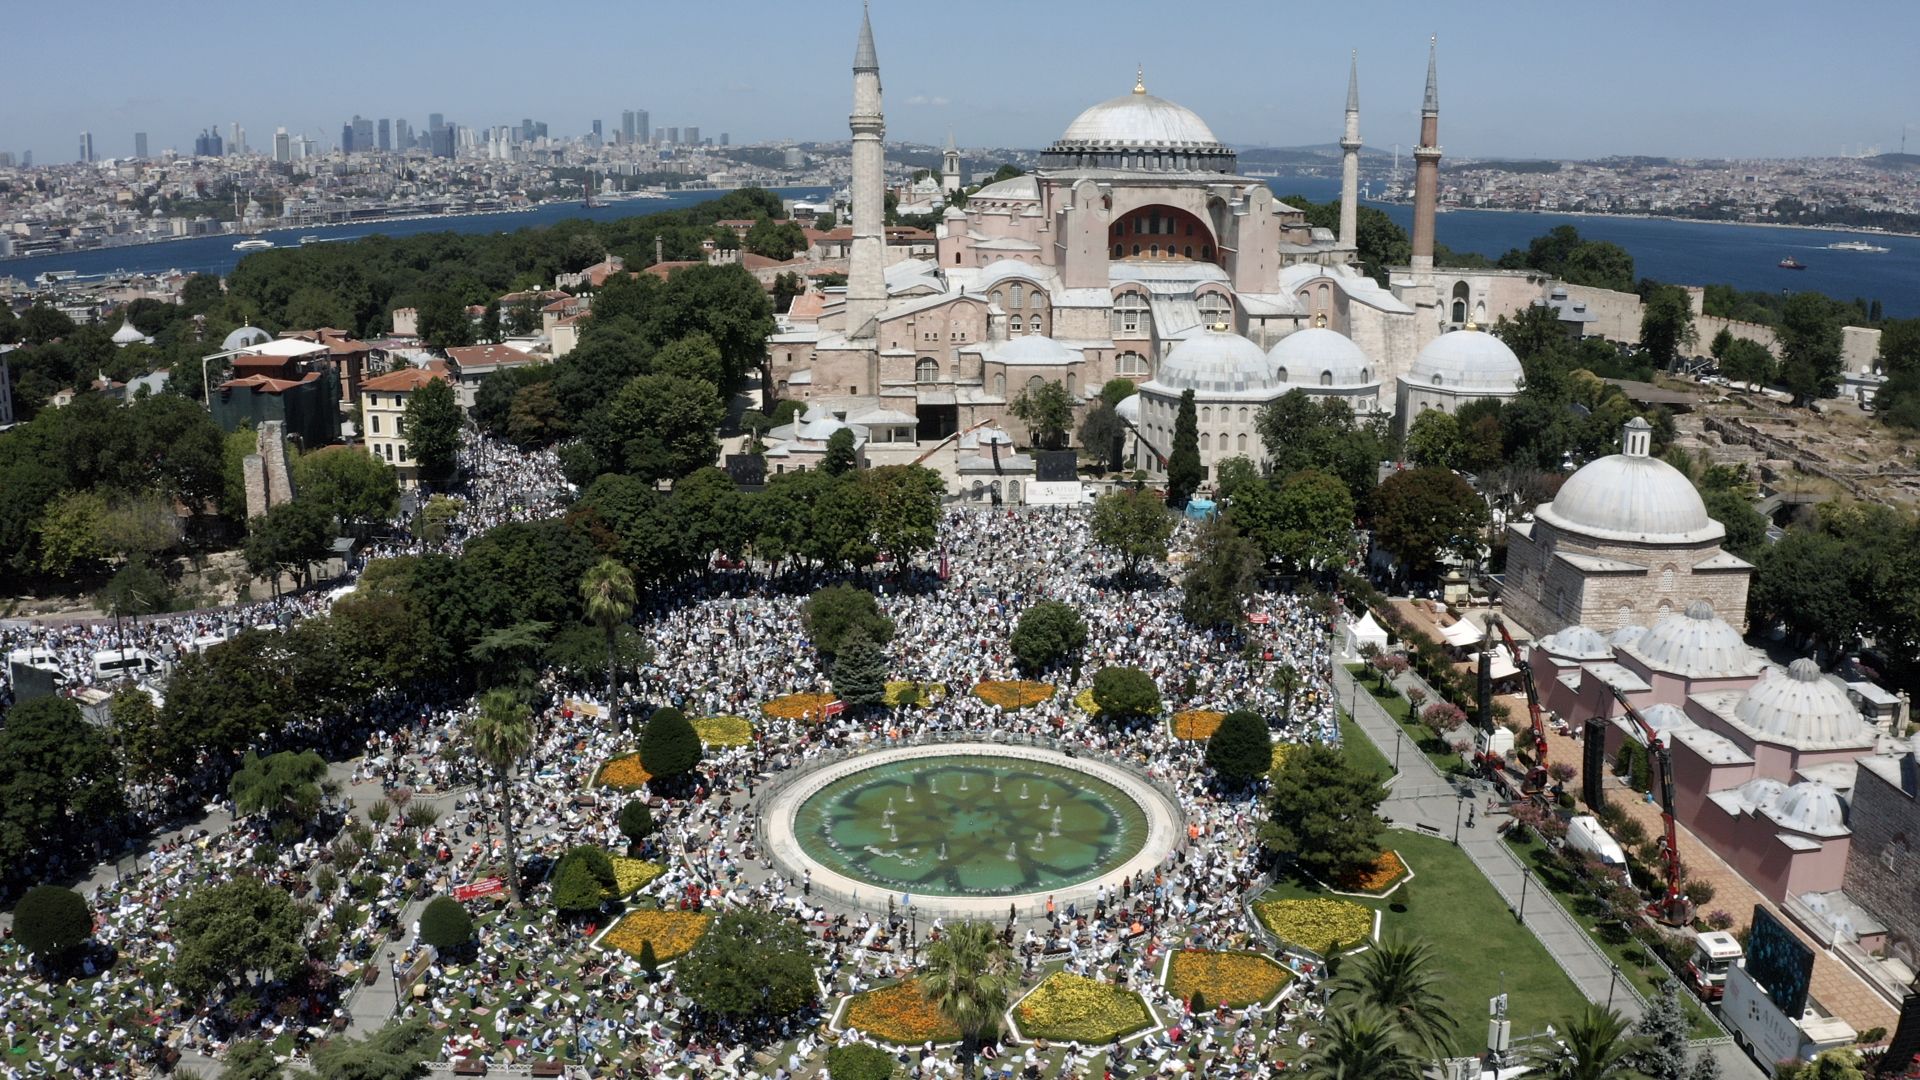  An aerial view of Hagia Sophia on July 24. 